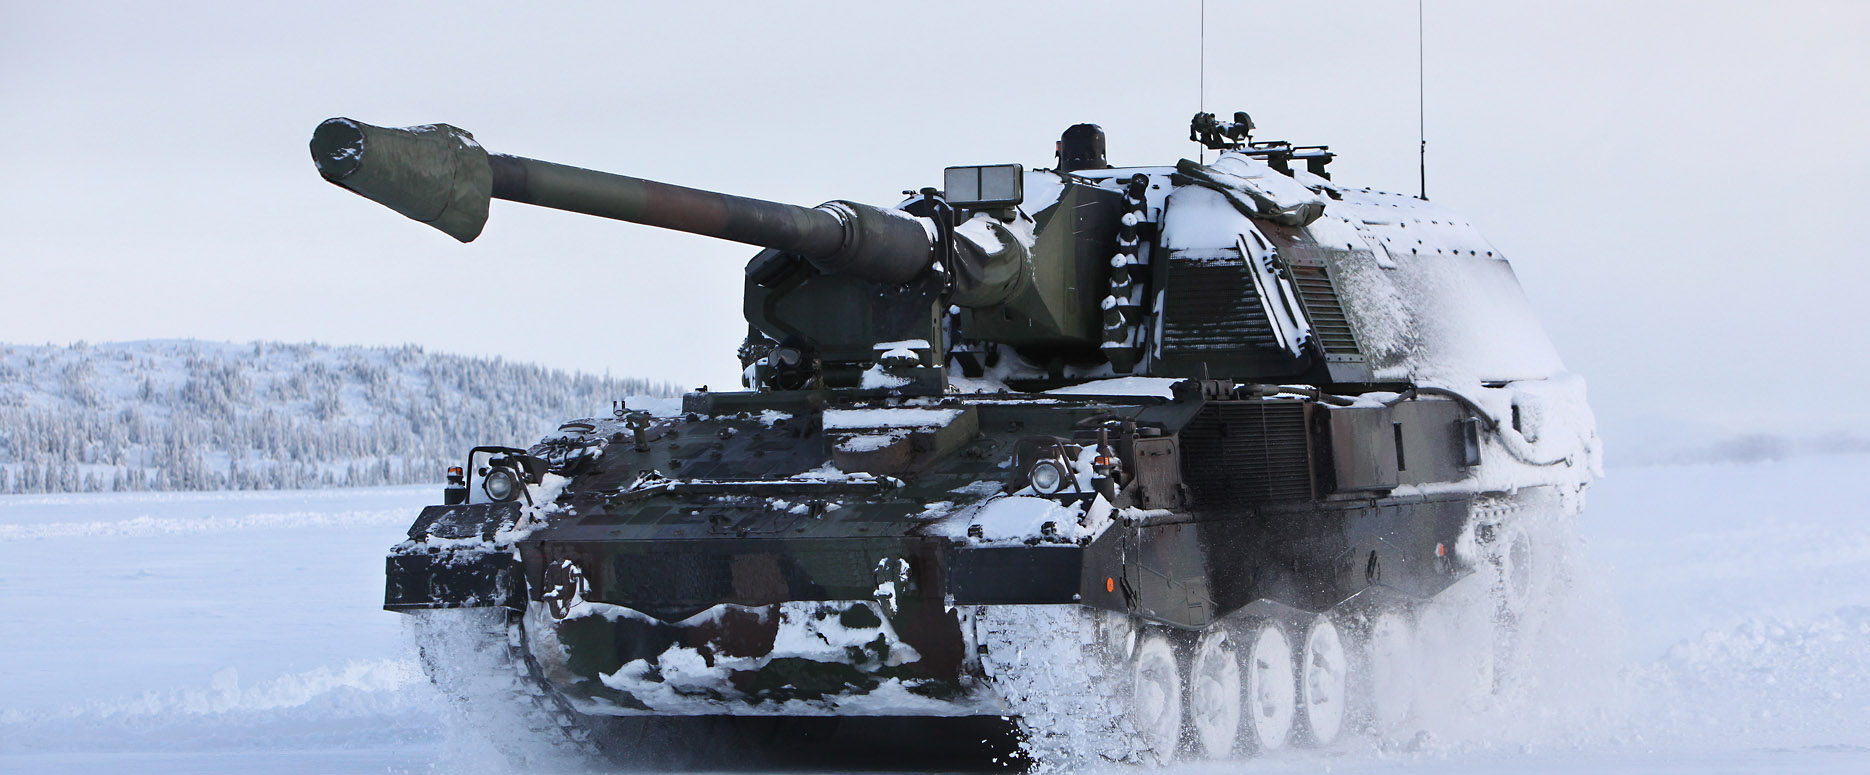 PzH2000 armoured howitzer driving into snowy landscape and kicking up snow